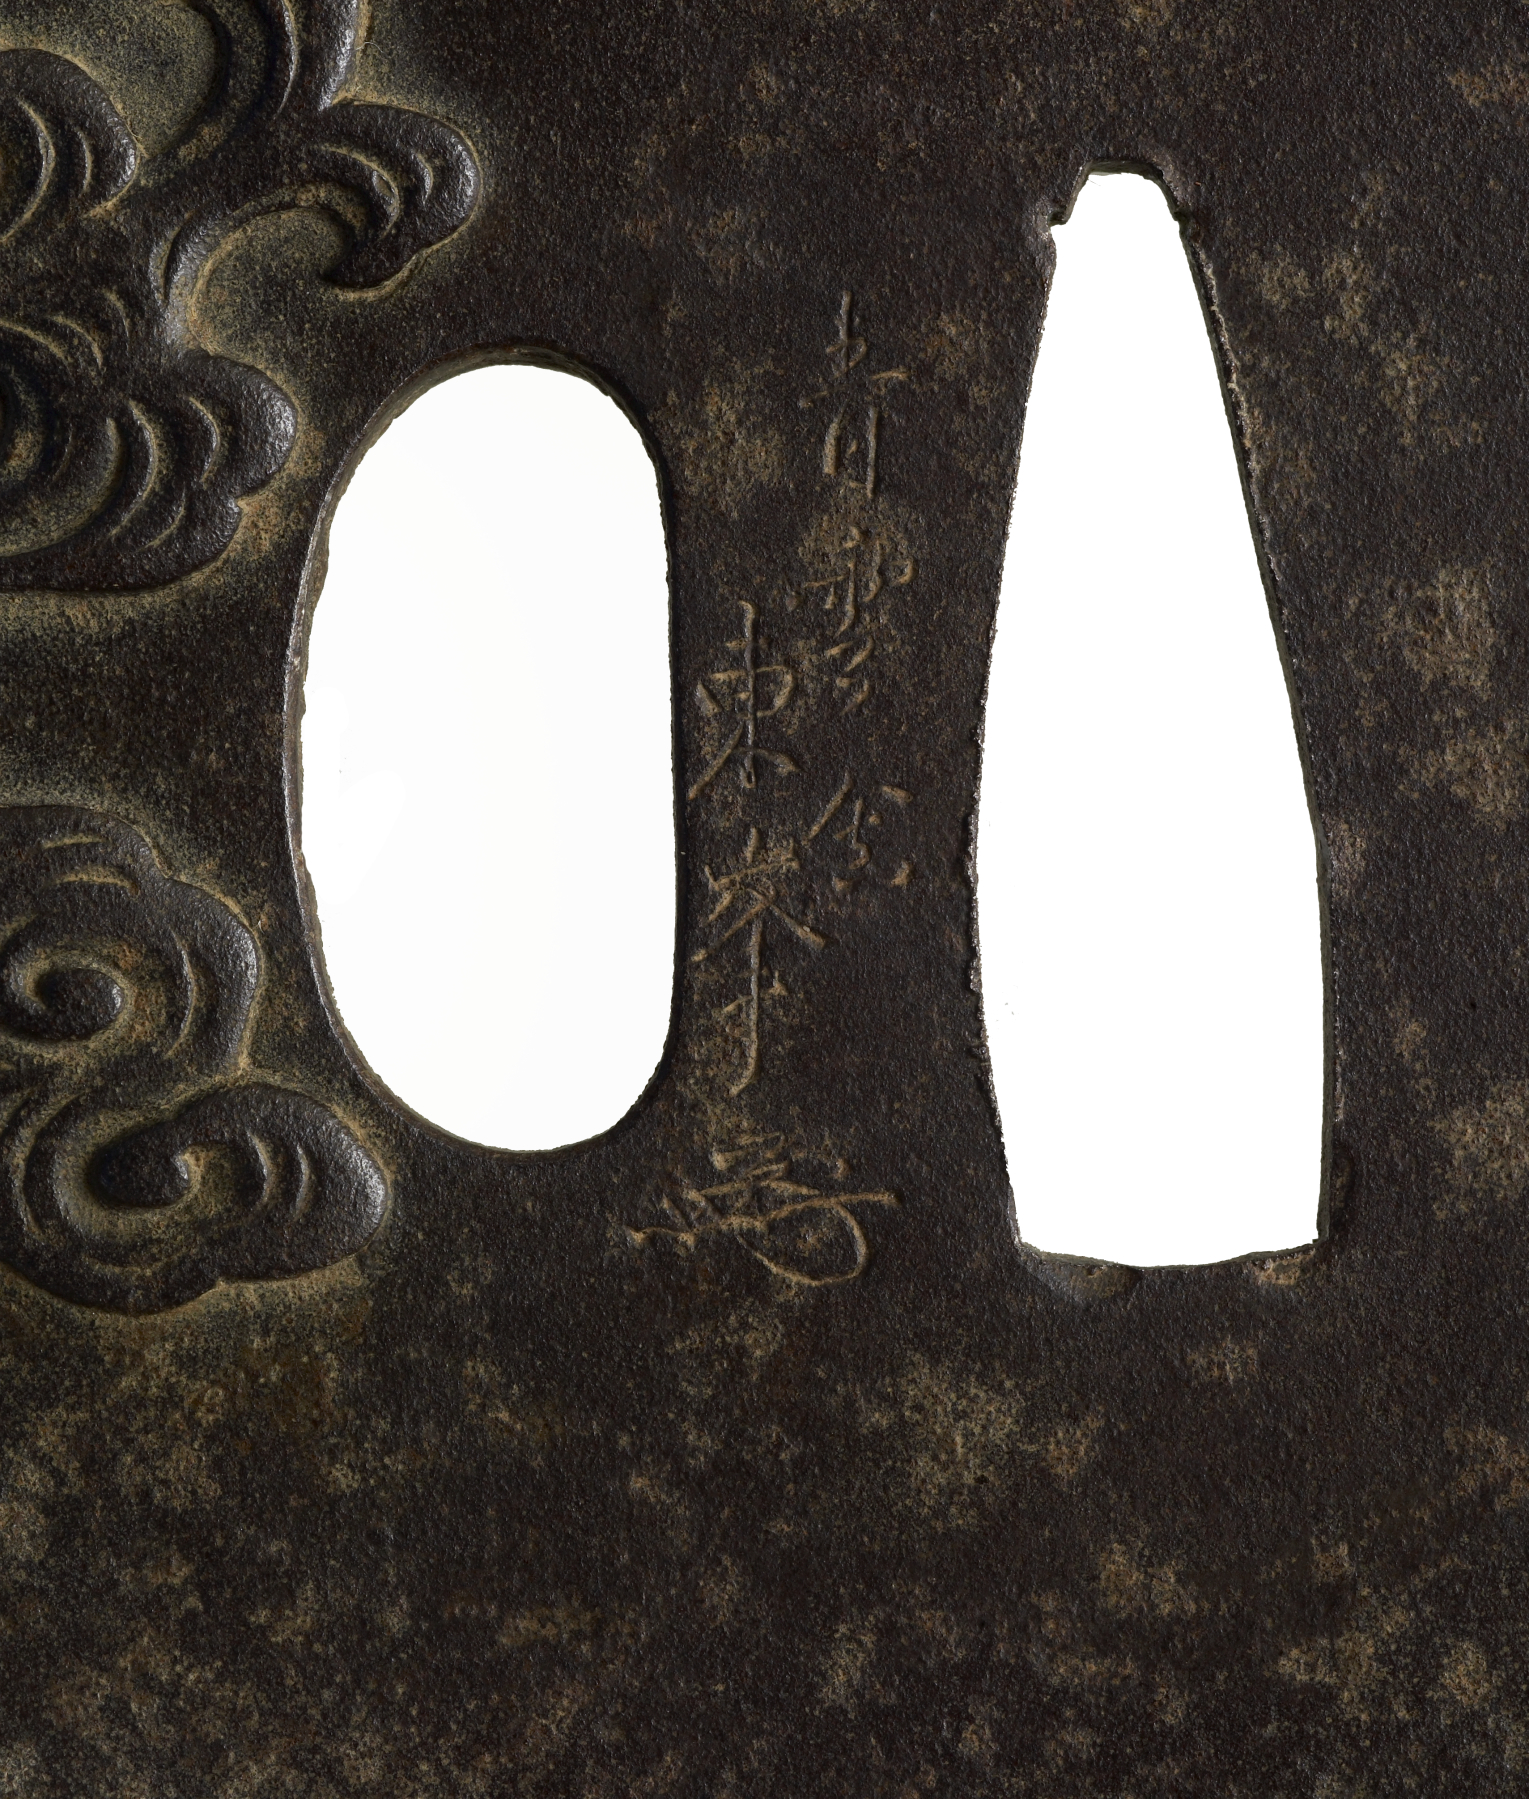 Image for Tsuba with Stag, Crane, Rock, and Fungus